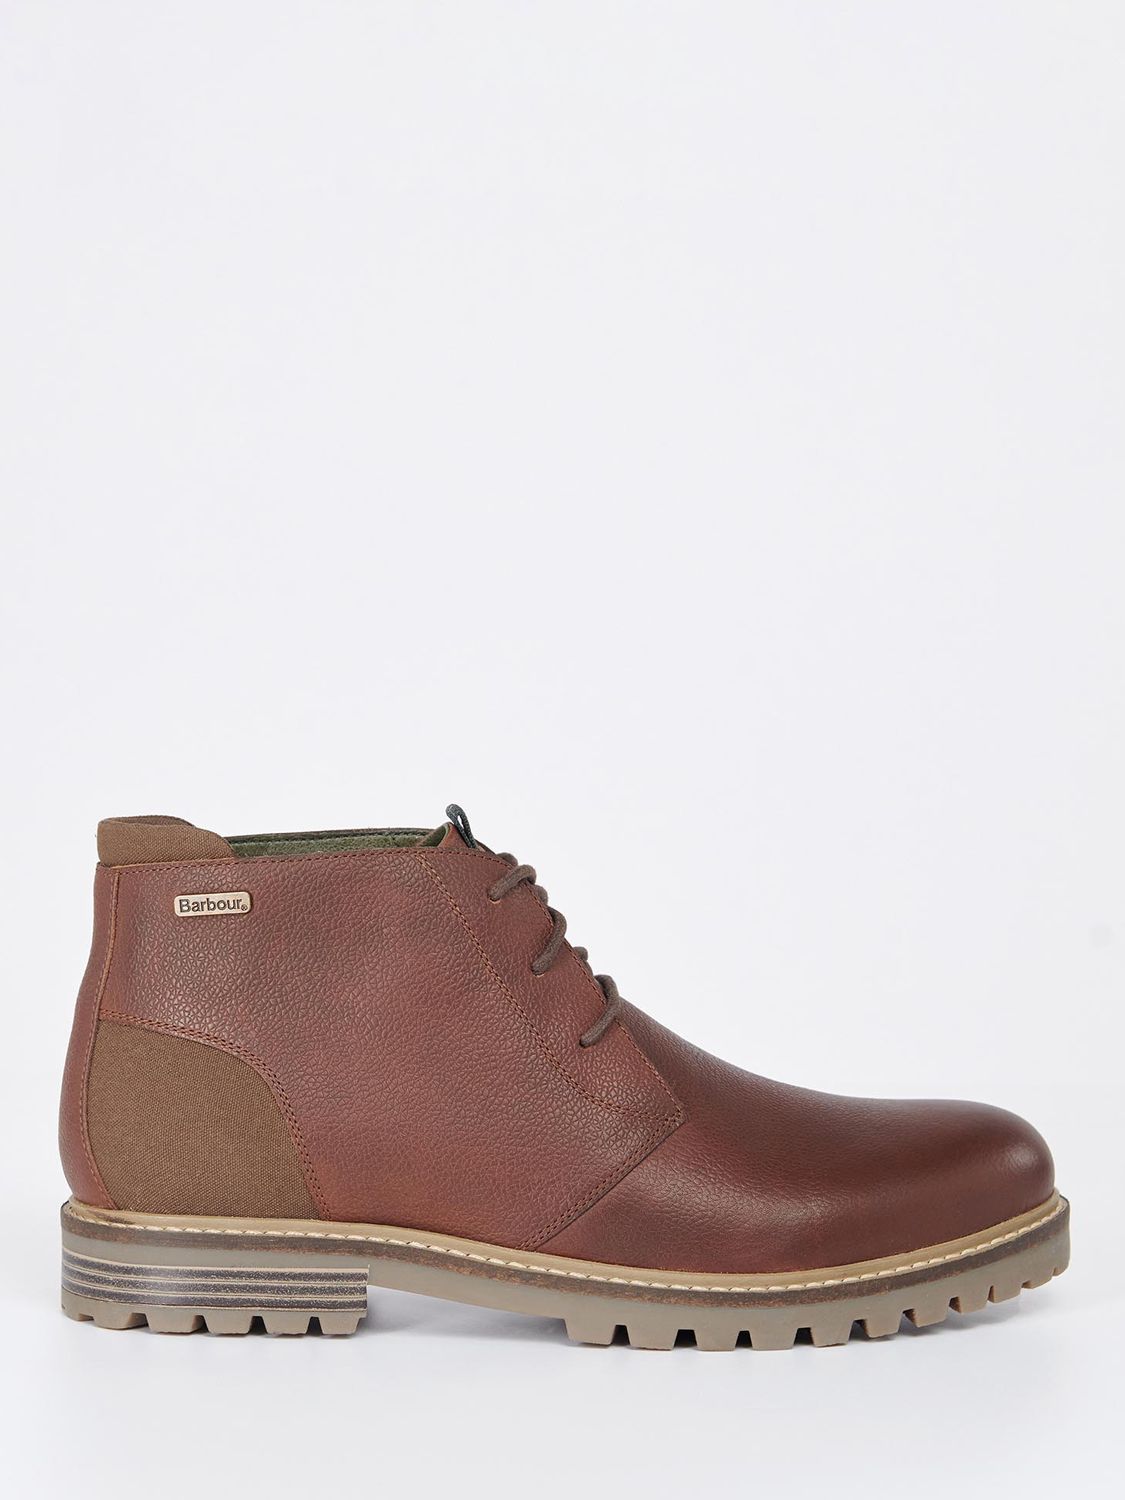 Barbour Pebble Leather Chukka Boots, Brown at John Lewis & Partners